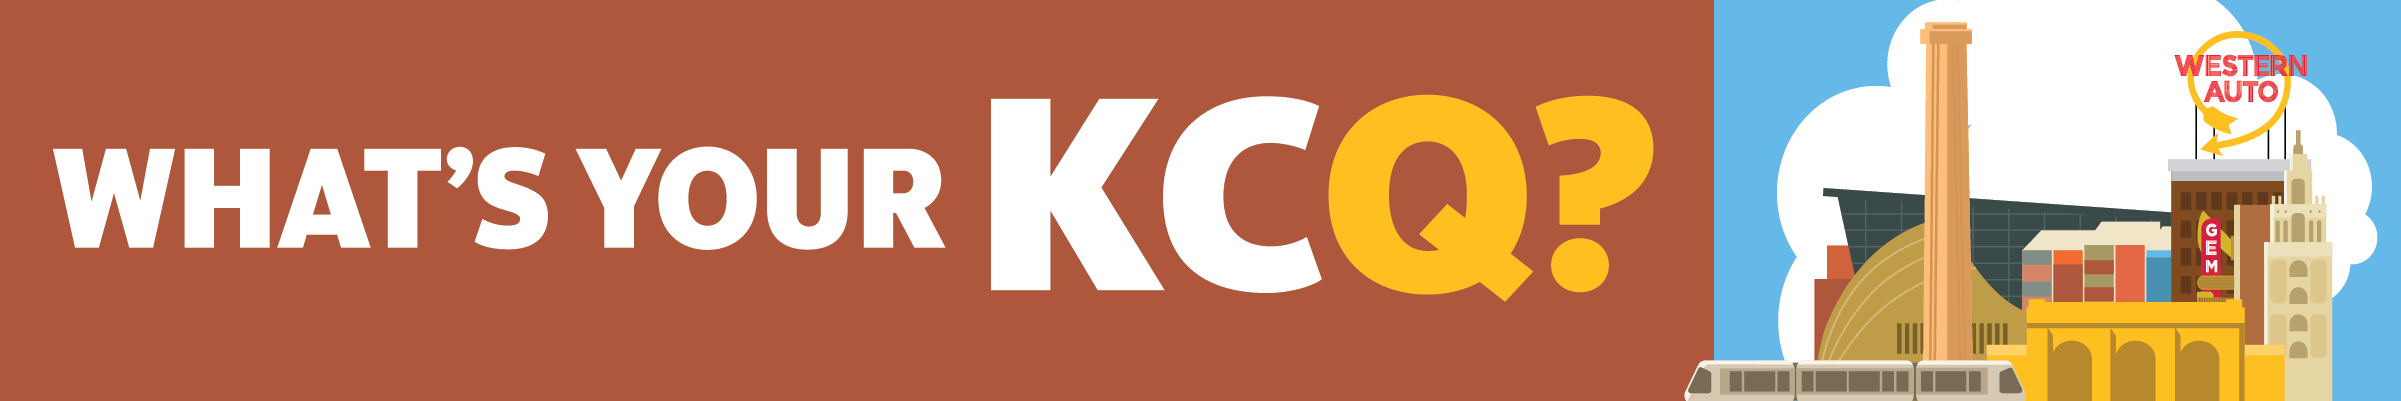 'What's your KCQ?' on brick background with Kansas City skyline